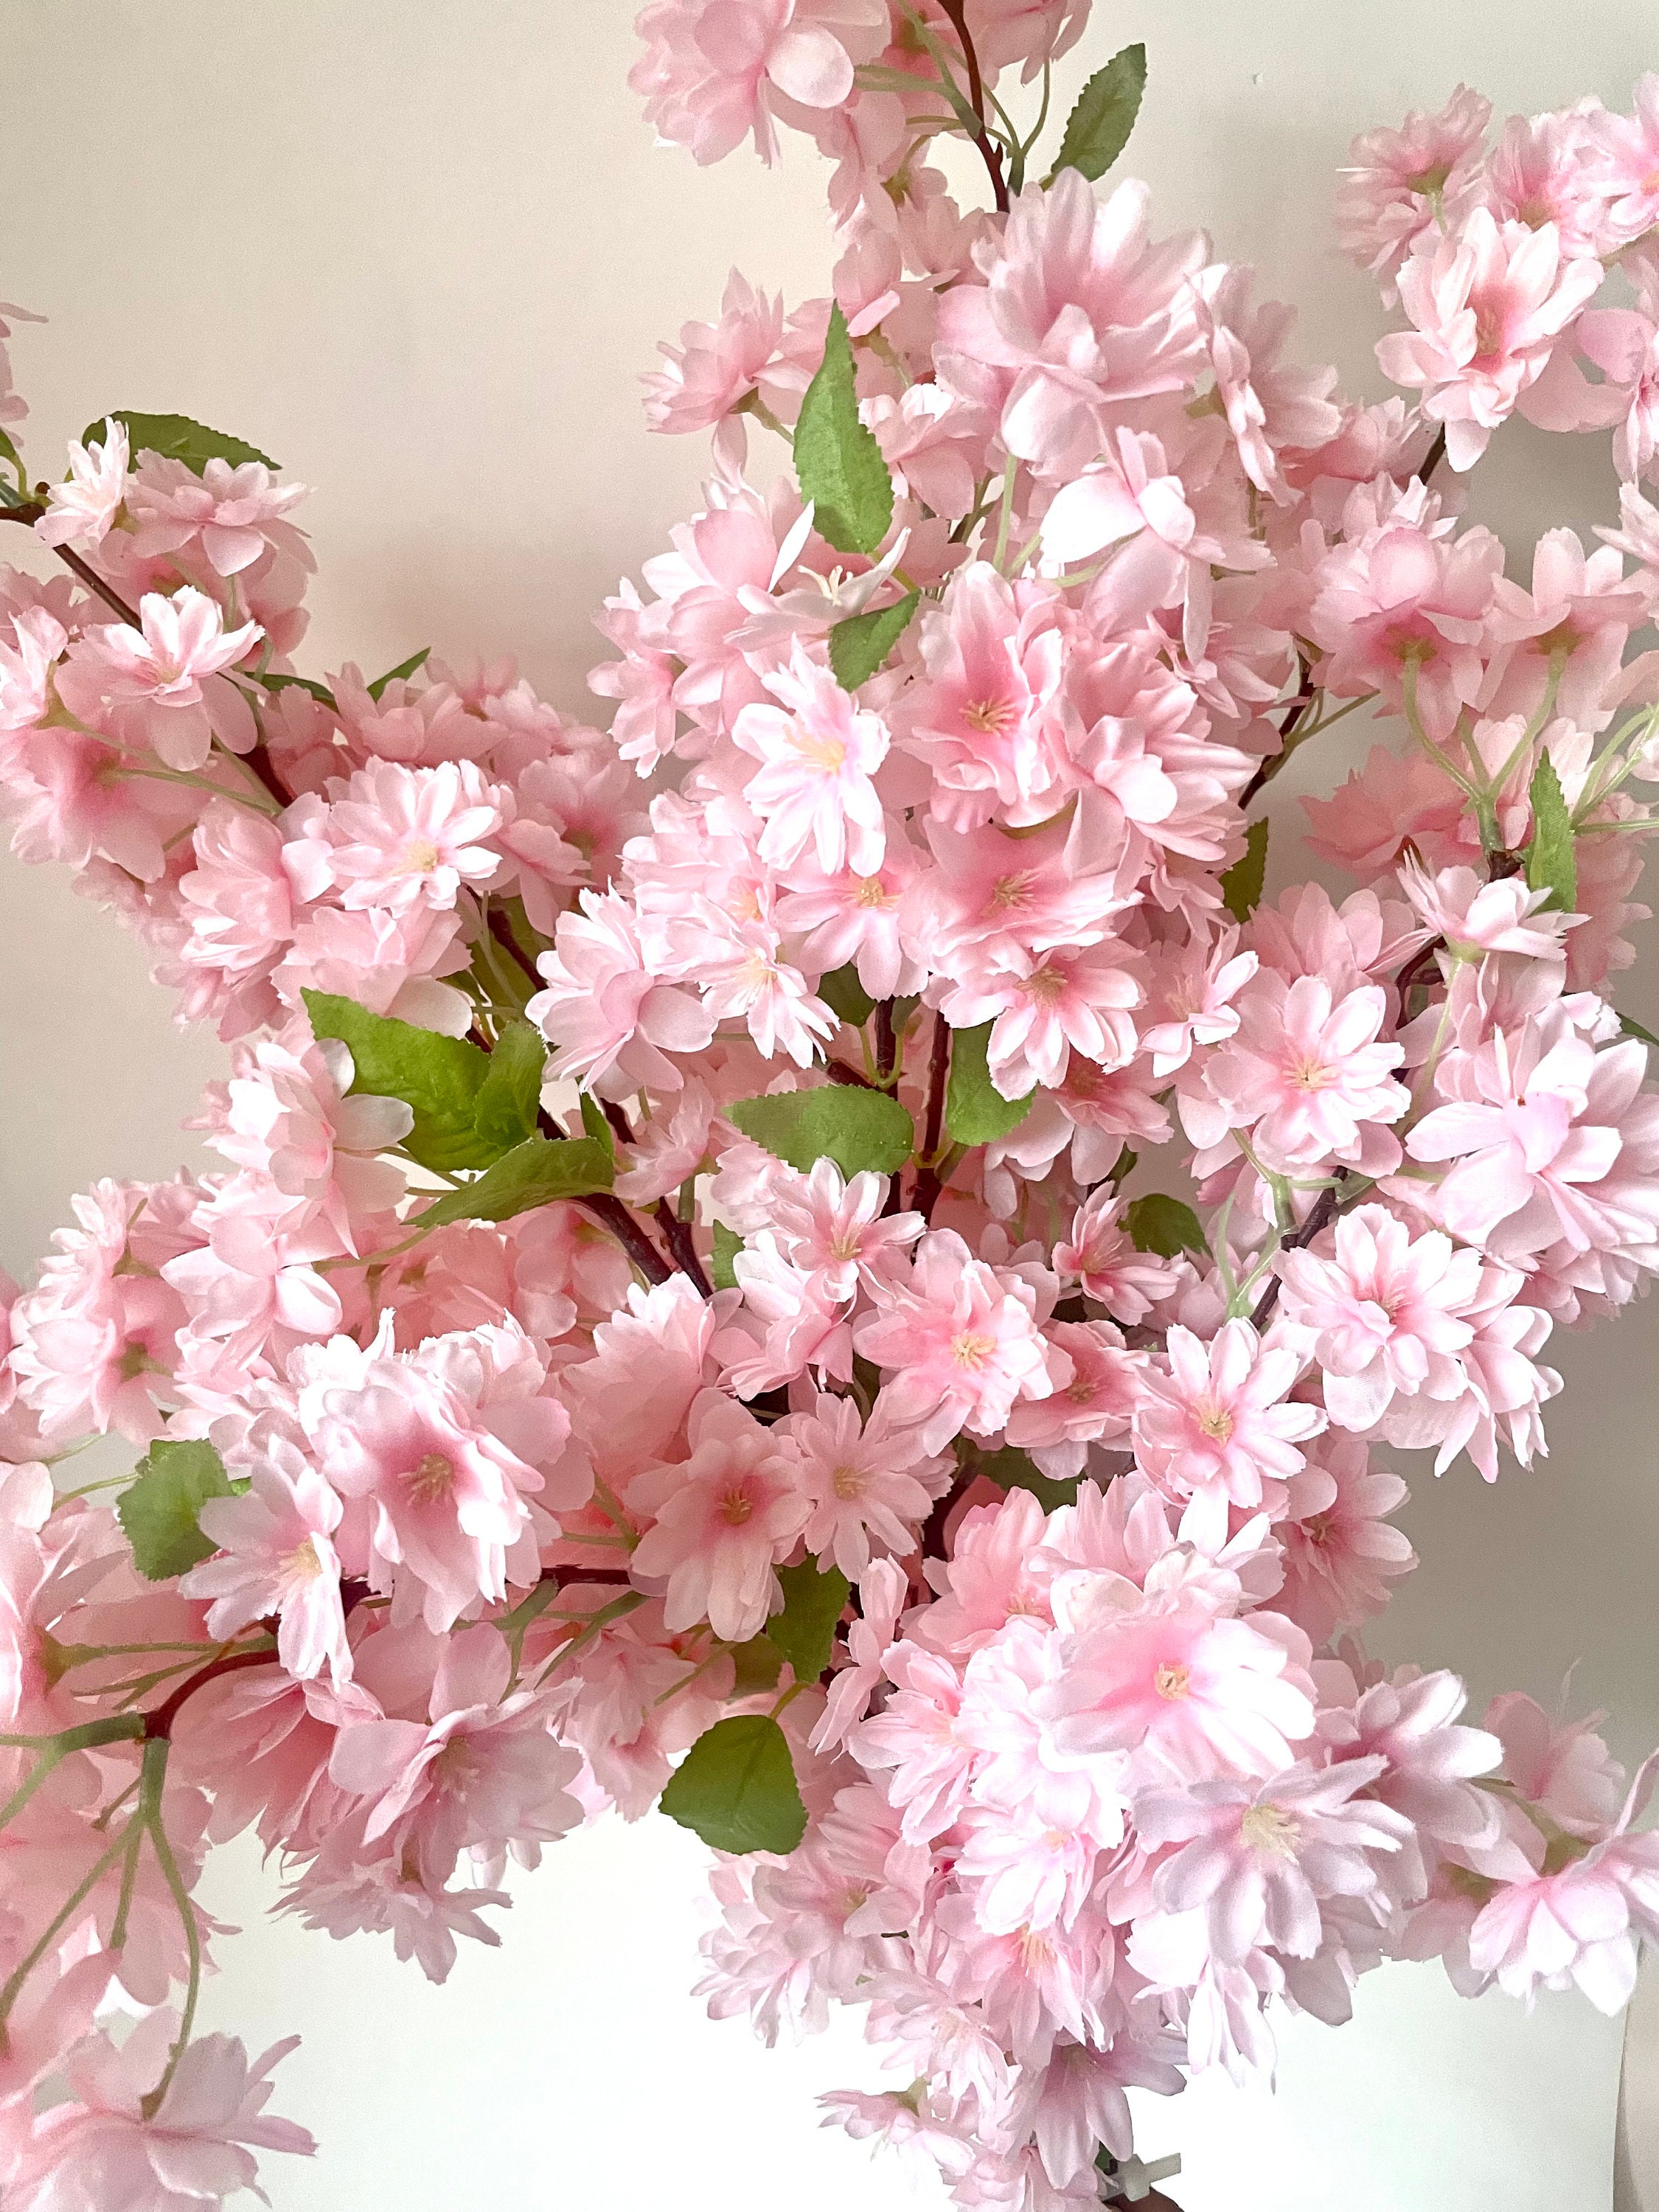 Source Light Pink Cherry Blossom Self-adhesive Frosted Cellophane BOPP Bags  on m.